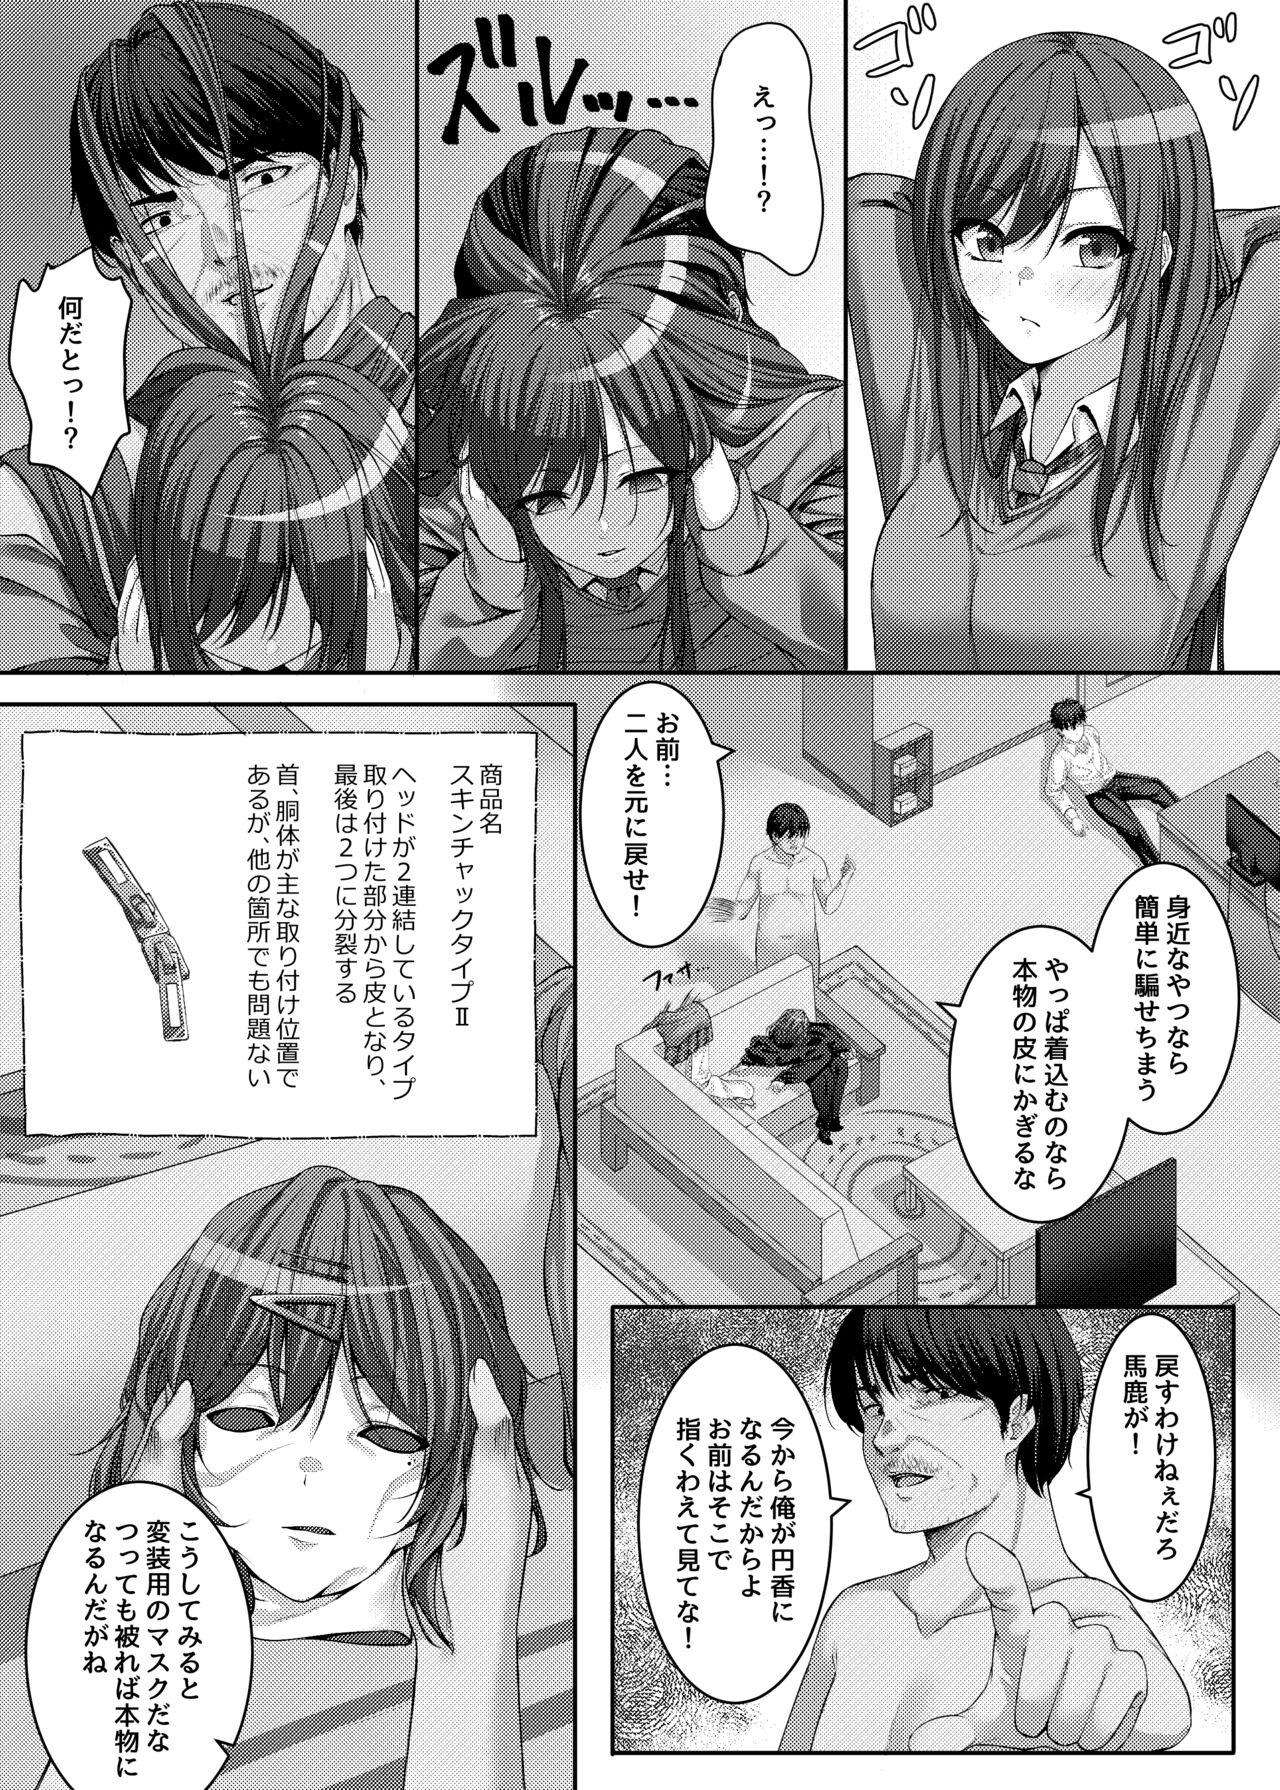 Van 移り皮り～円香編～ - The idolmaster Oil - Page 3